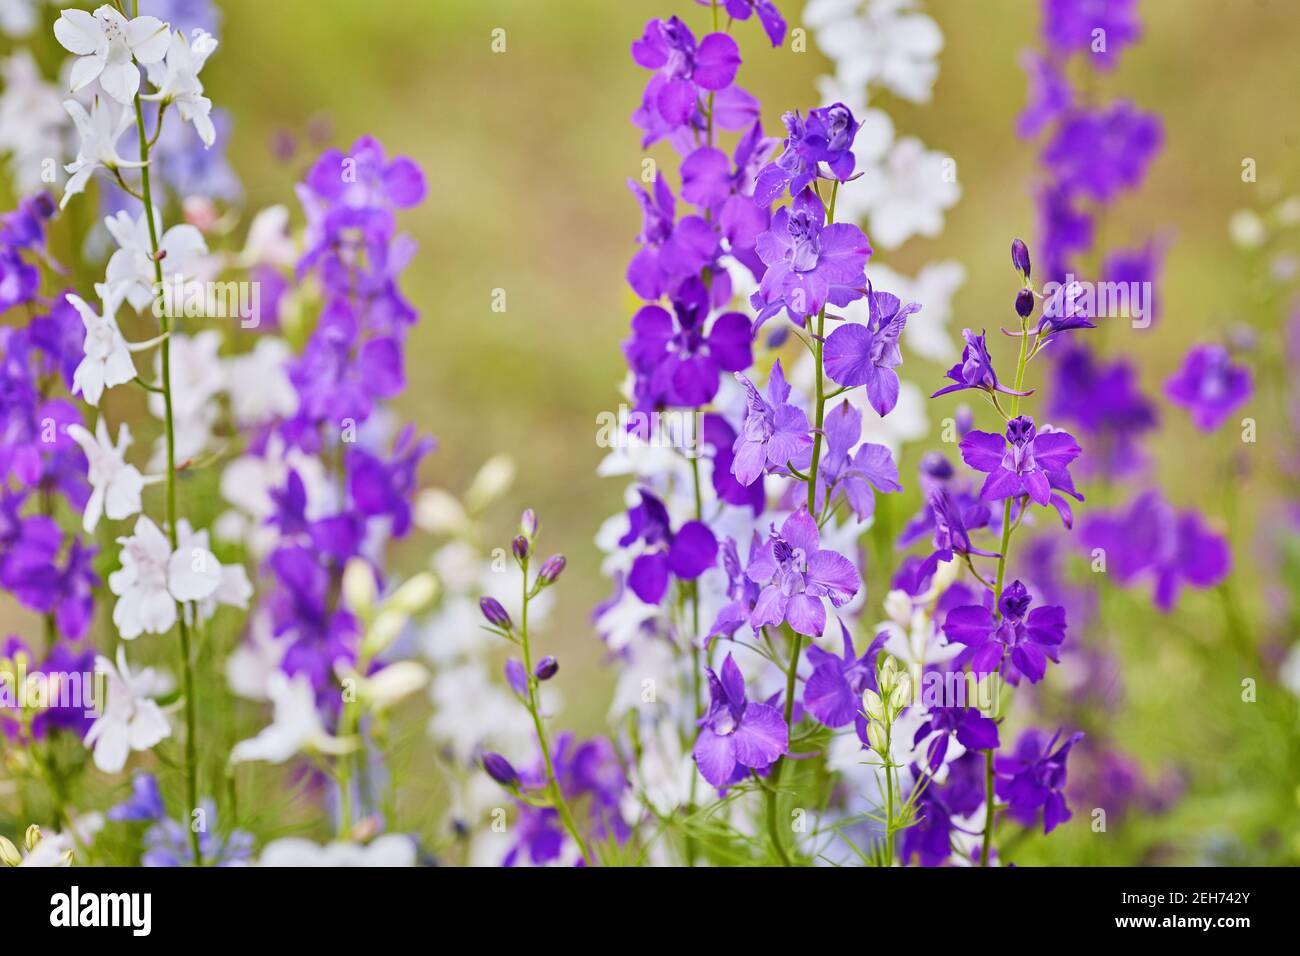 Delphinium,Candle Delphinium,many beautiful purple and blue flowers  blooming in the garden,English Larkspur,Tall Larkspur Stock Photo - Alamy